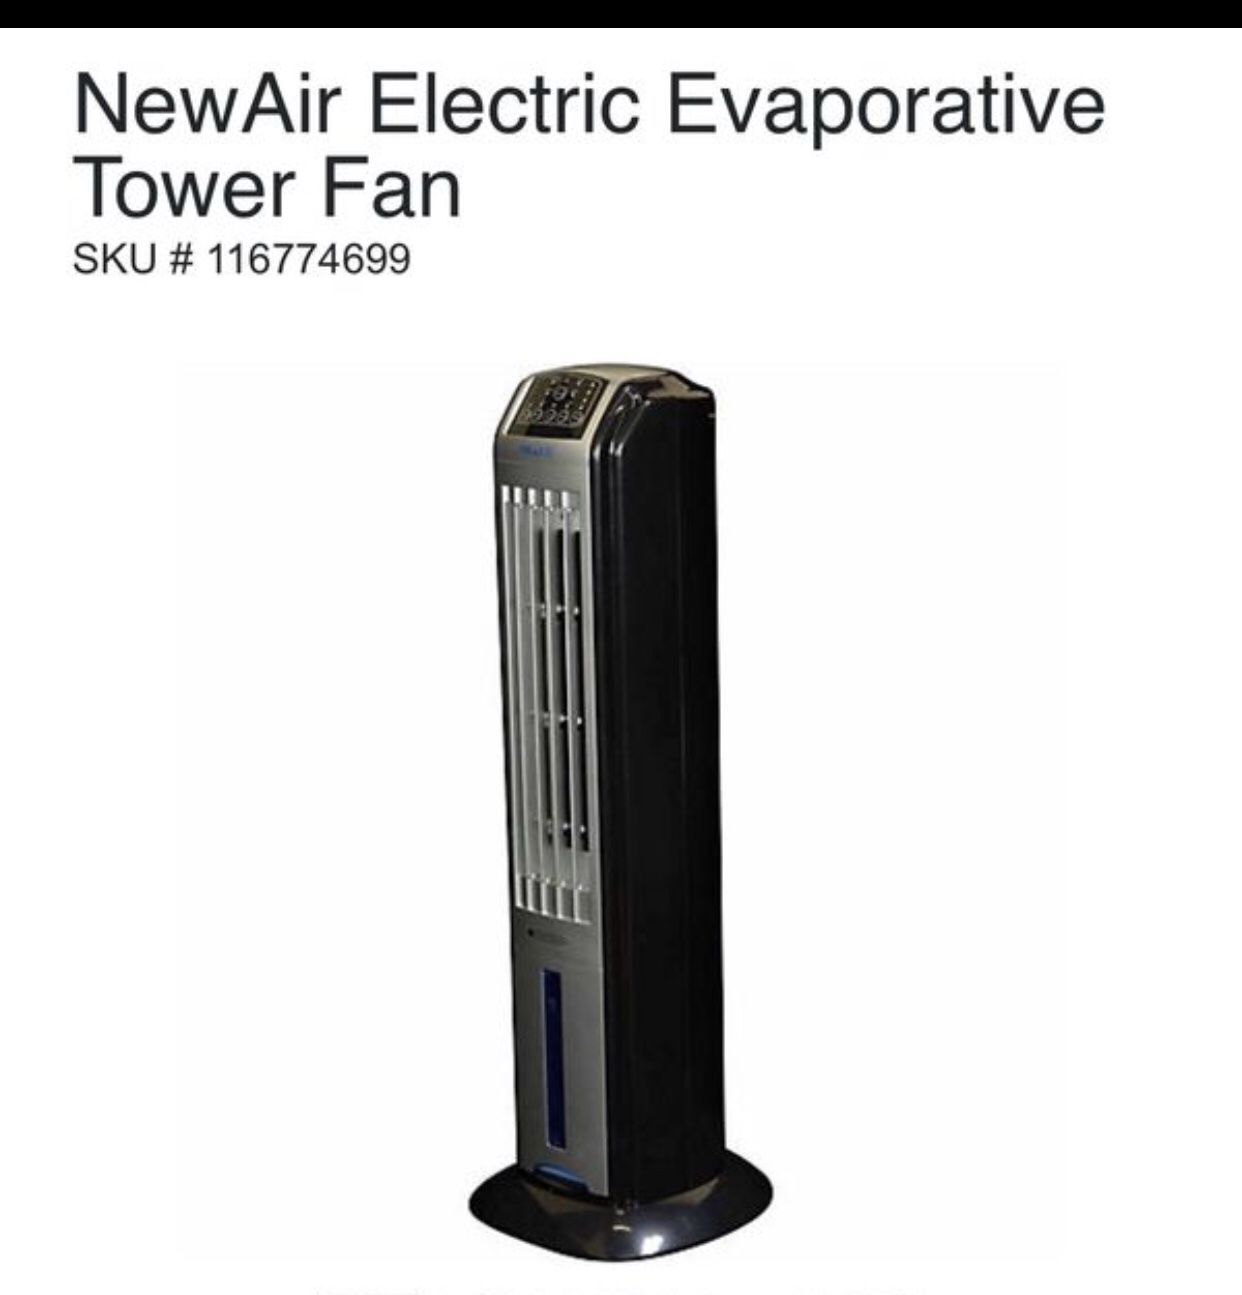 New air electric evaporative tower fan